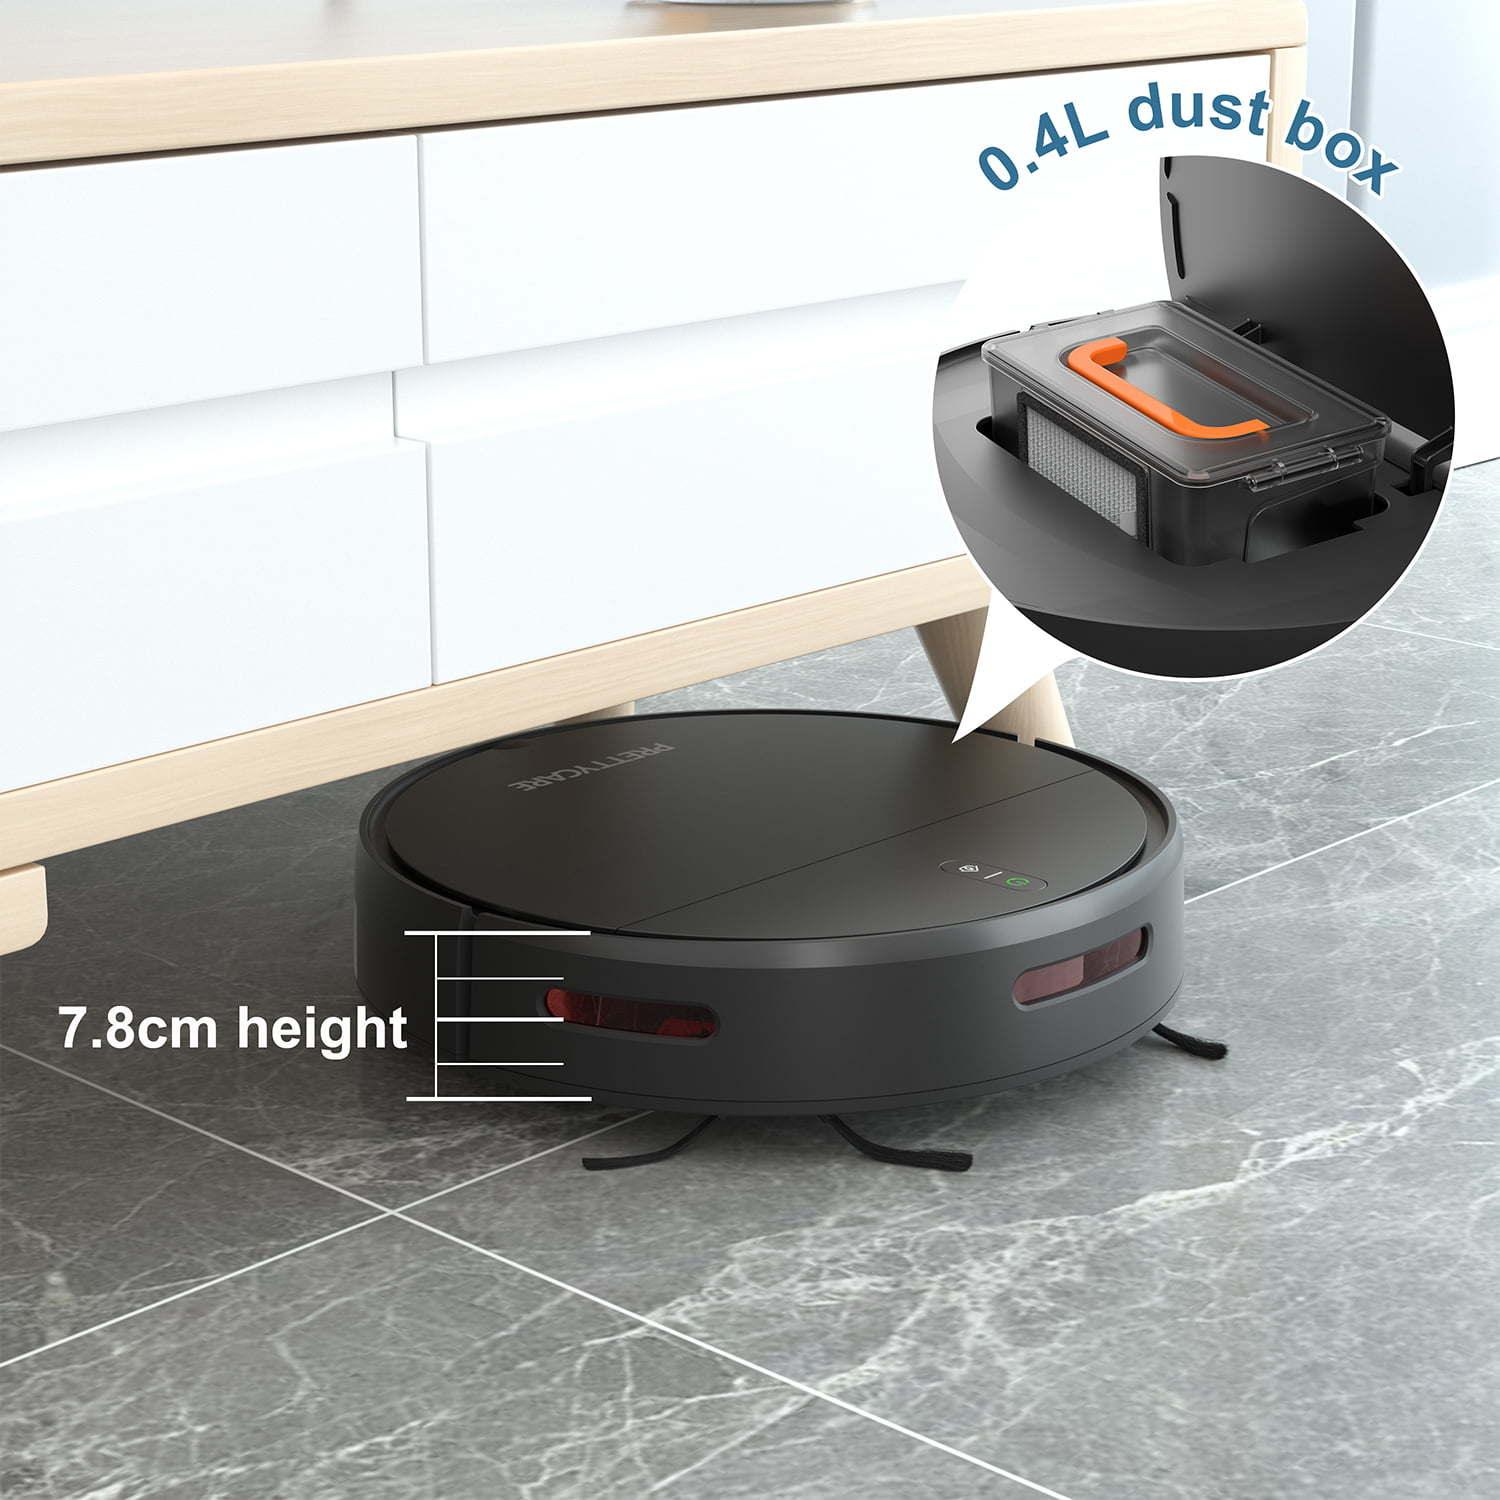 LazyClean Robot Vacuum Cleaner with 2200Pa,Featured Carpet Boost,Tangle-Free,Ultra Slim,Self-Charging C1 - Lazy Pro